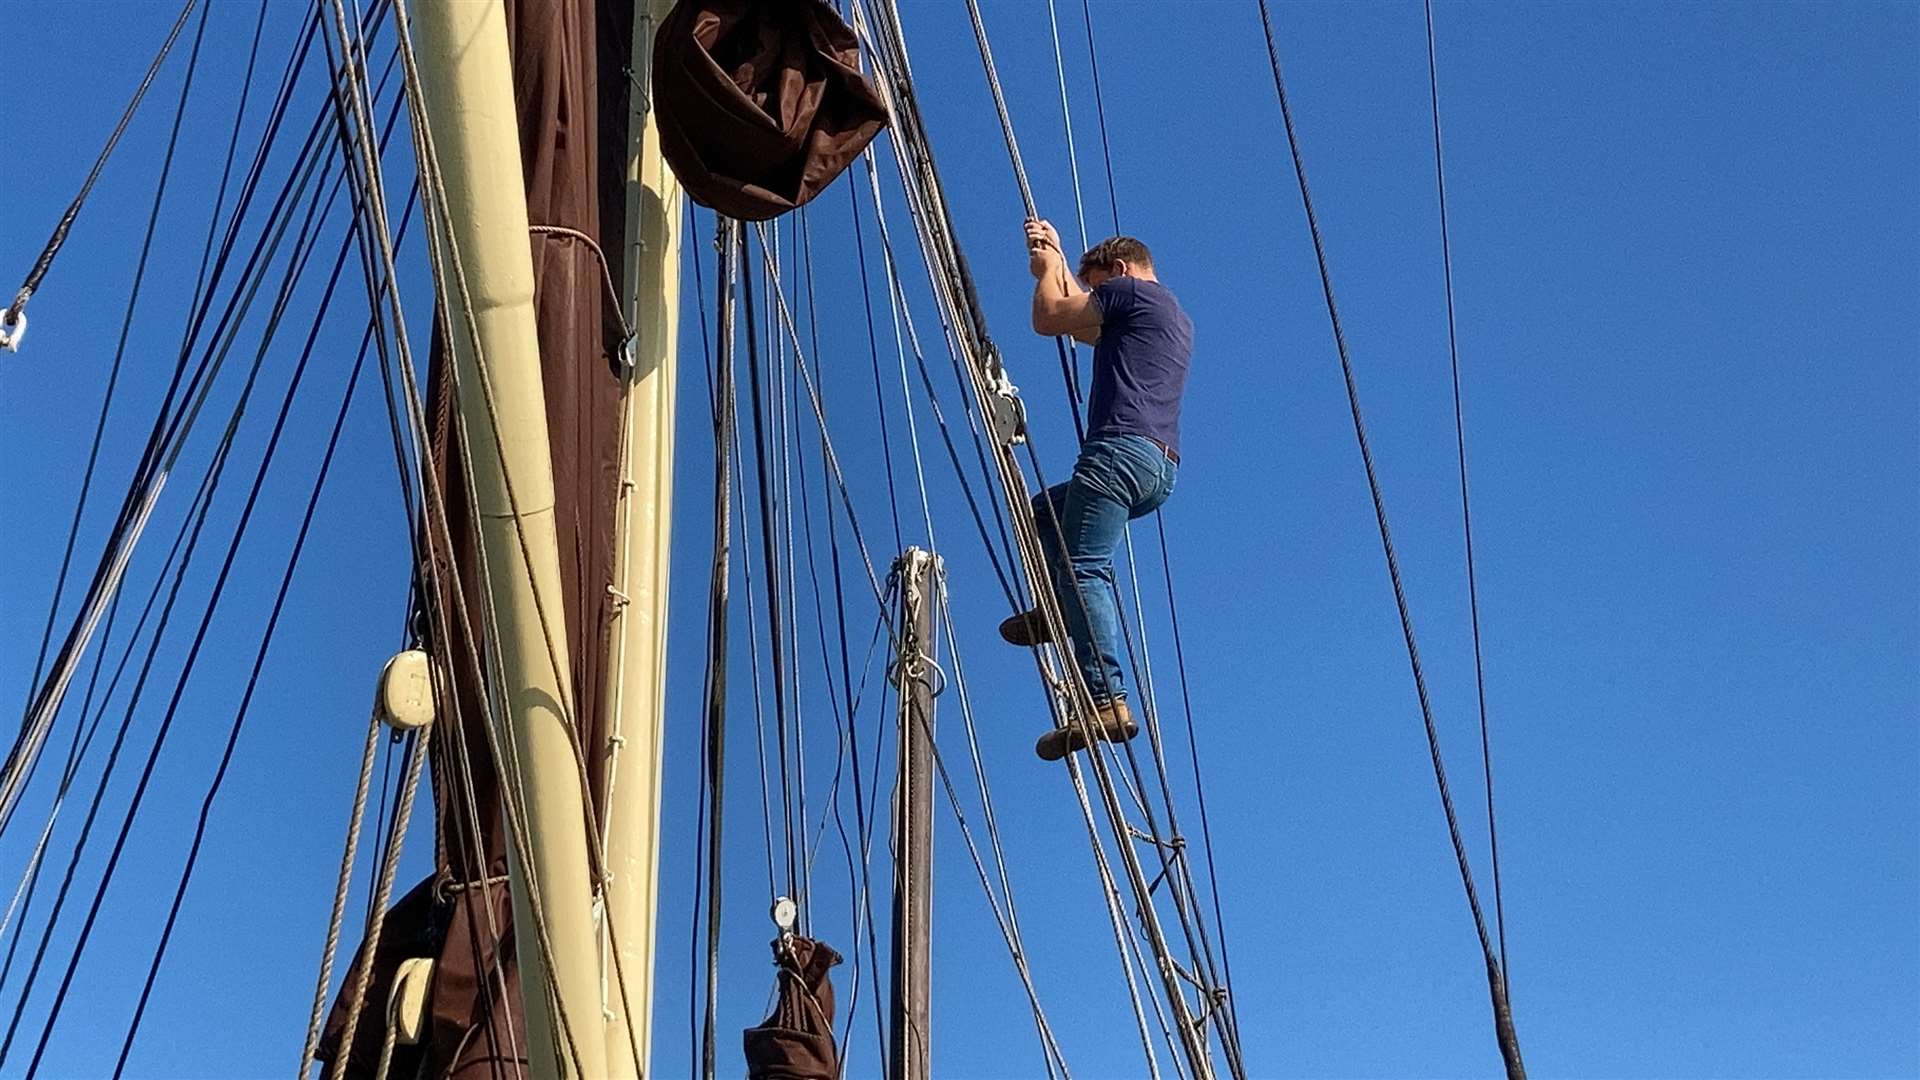 Man the rigging: Ed Gransden shins up the ropes aboard the Edith May